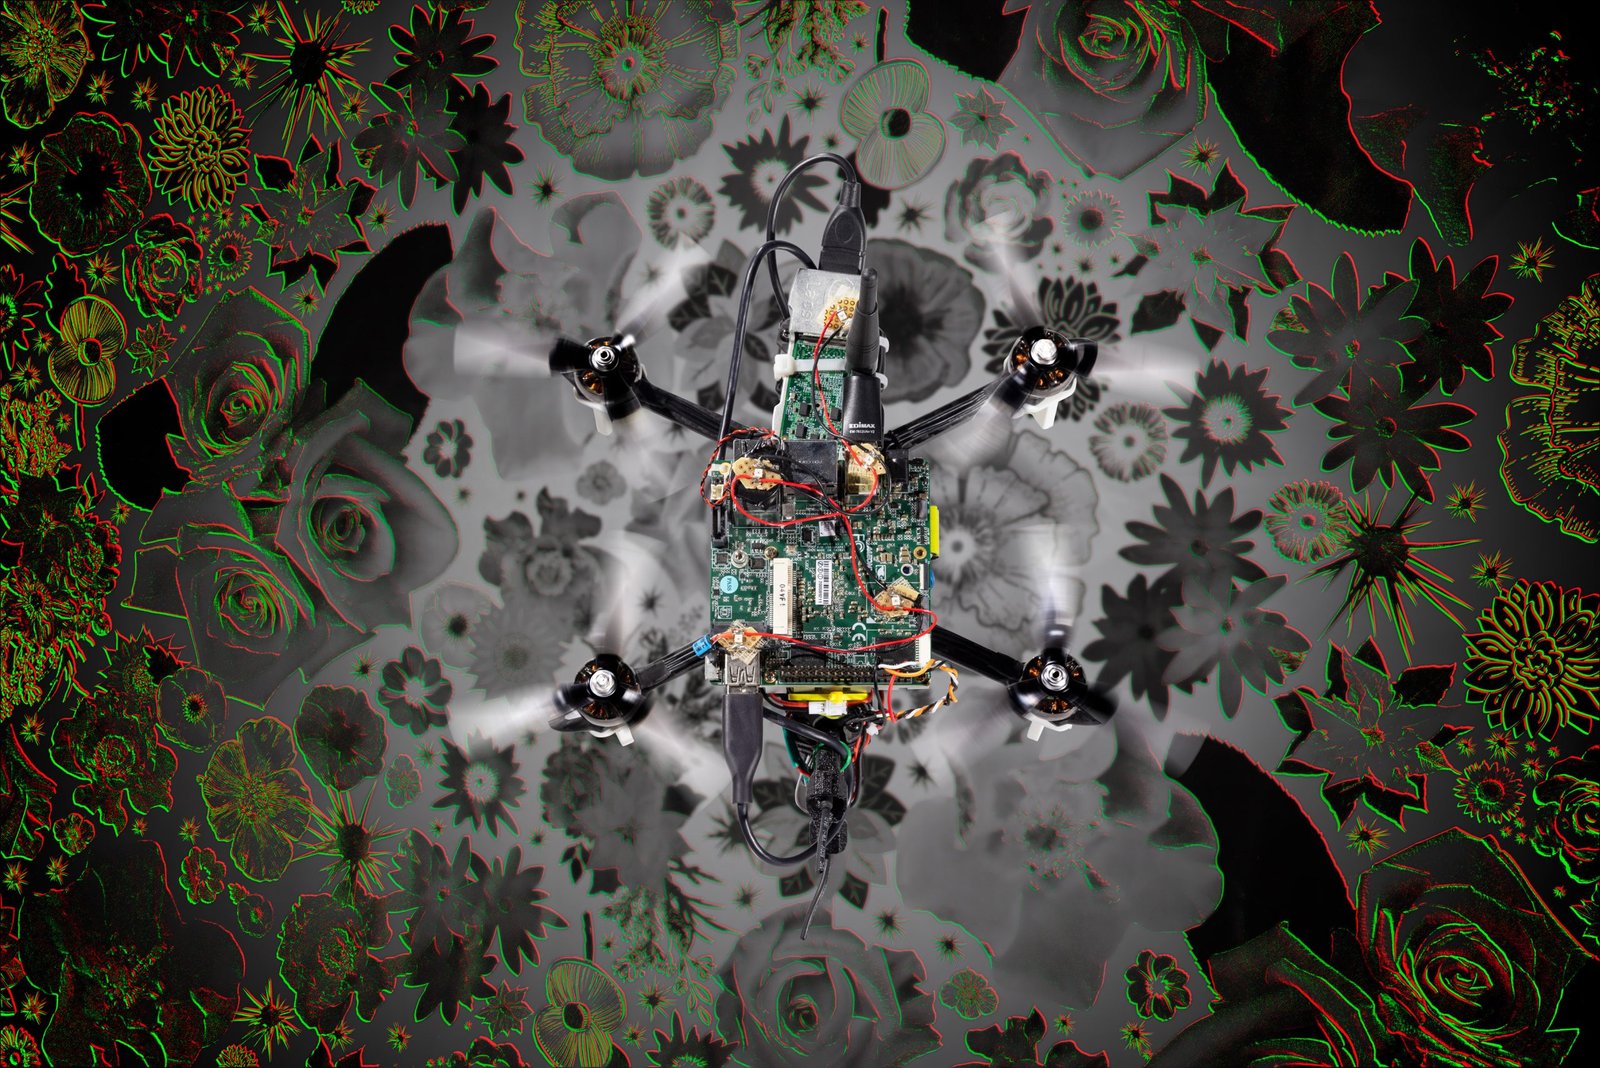 Researchers Develop Neuromorphic Drones That Learn Like Animals